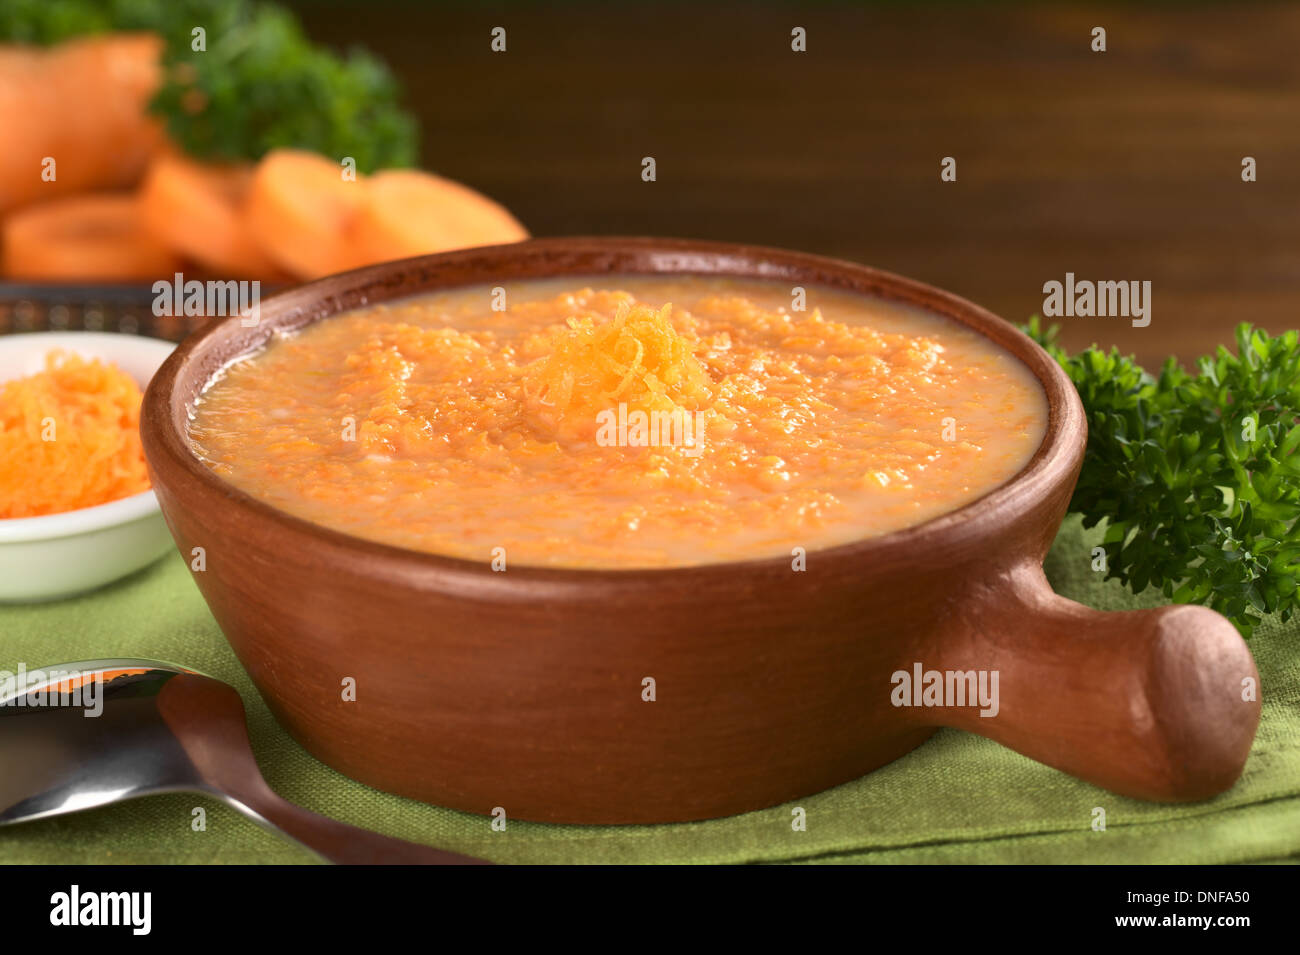 Carrot cream soup garnished with a small pile of grated carrots Stock Photo